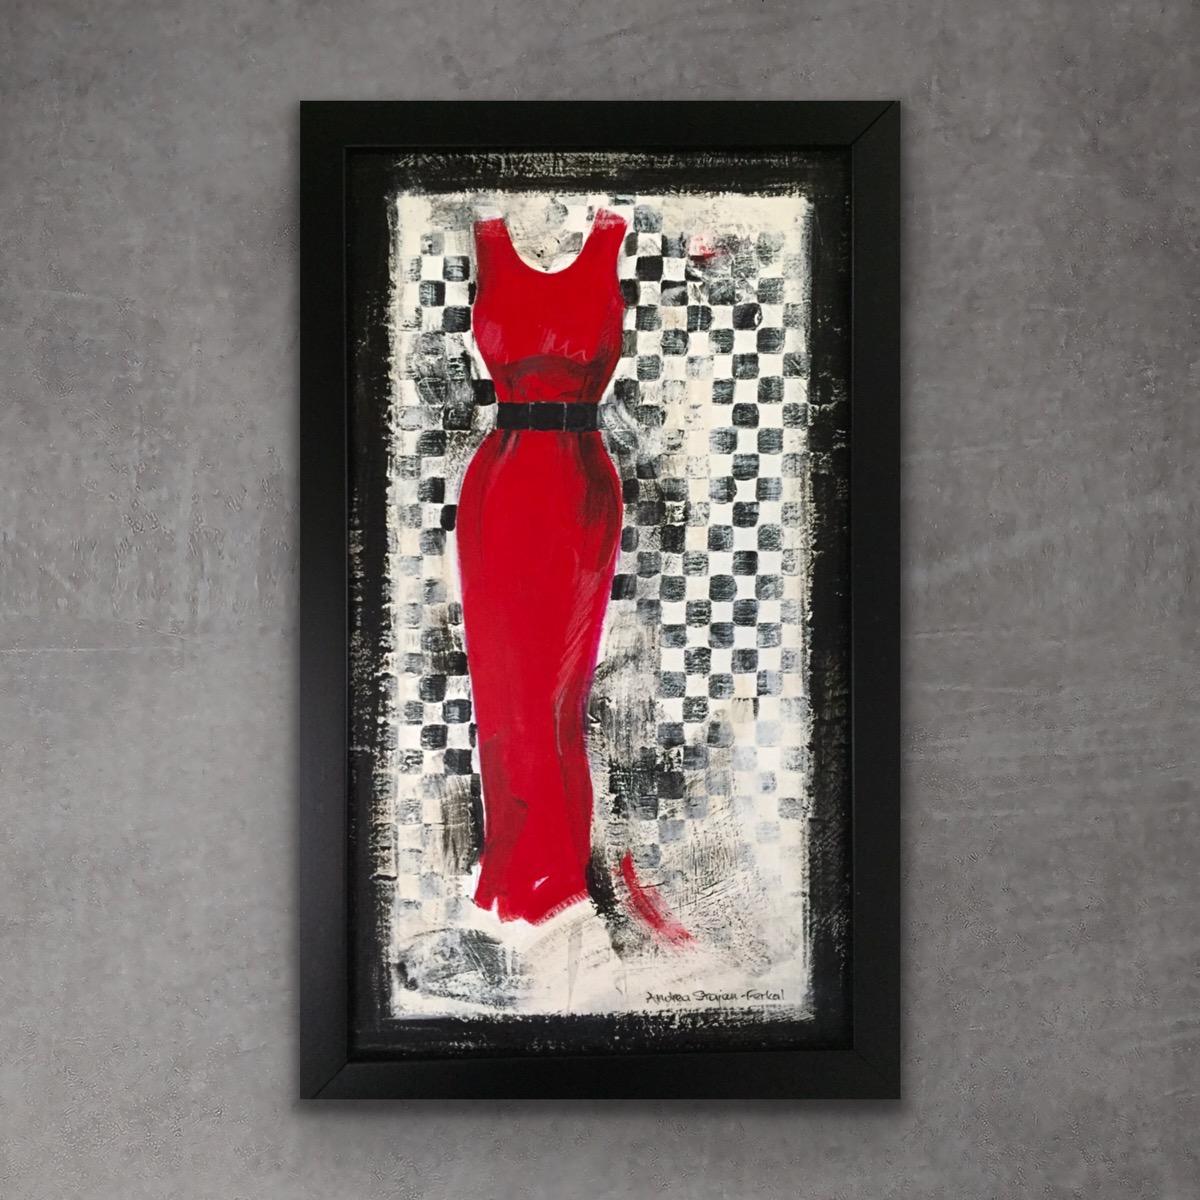 Going Retro - 2 (Red, Vintage Inspired Dress) - Painting by Andrea Stajan-Ferkul